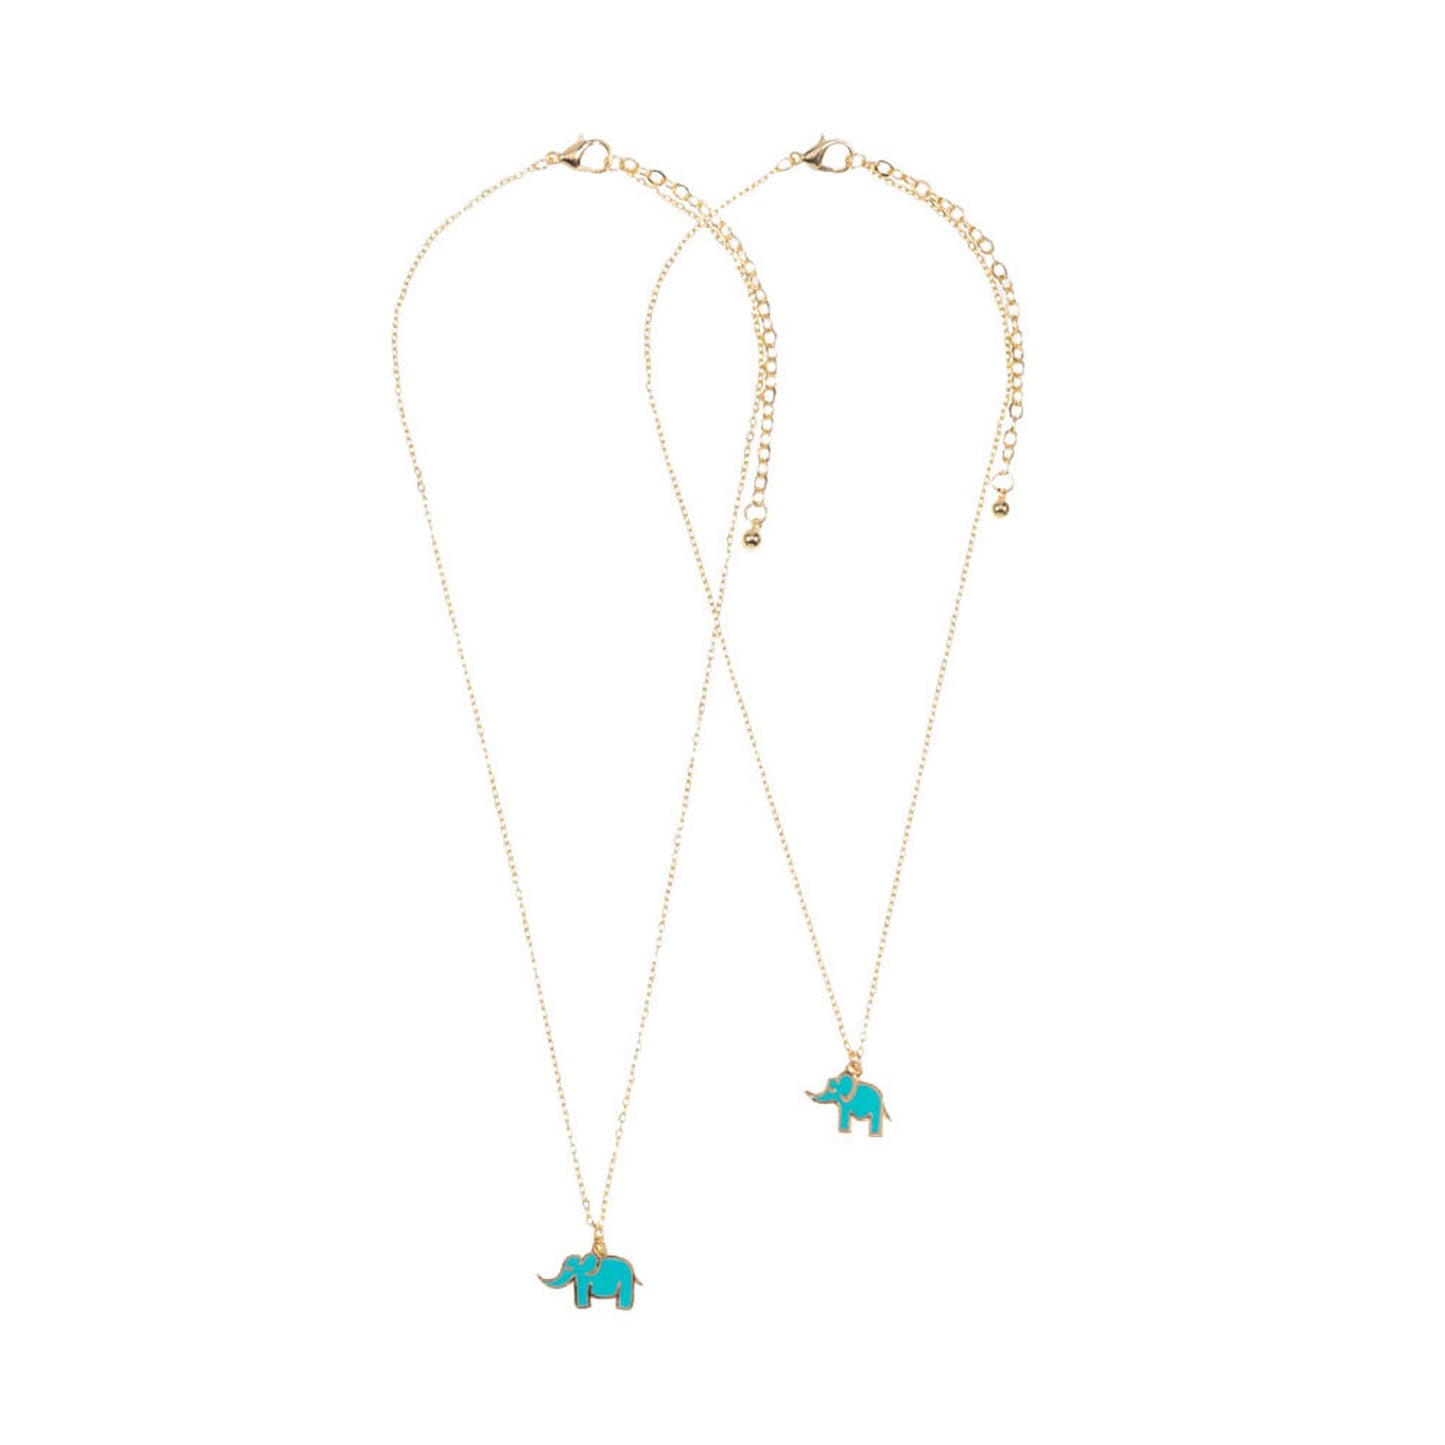 Turquoise 2PCS Enamel Elephant Pendant Moms and Kids Set Necklaces. These necklace earrings sets are Elegant. Beautifully crafted design adds a glow to your gorgeous outfit. necklace that will create you glamorous look. Suitable for wear Party, Wedding, Engagement, Anniversary, Date Night or any special events. Perfect Birthday, Anniversary, Mother's Day & Graduation Gift, Prom Jewellery, Just Because Gift, Thank you Gift.